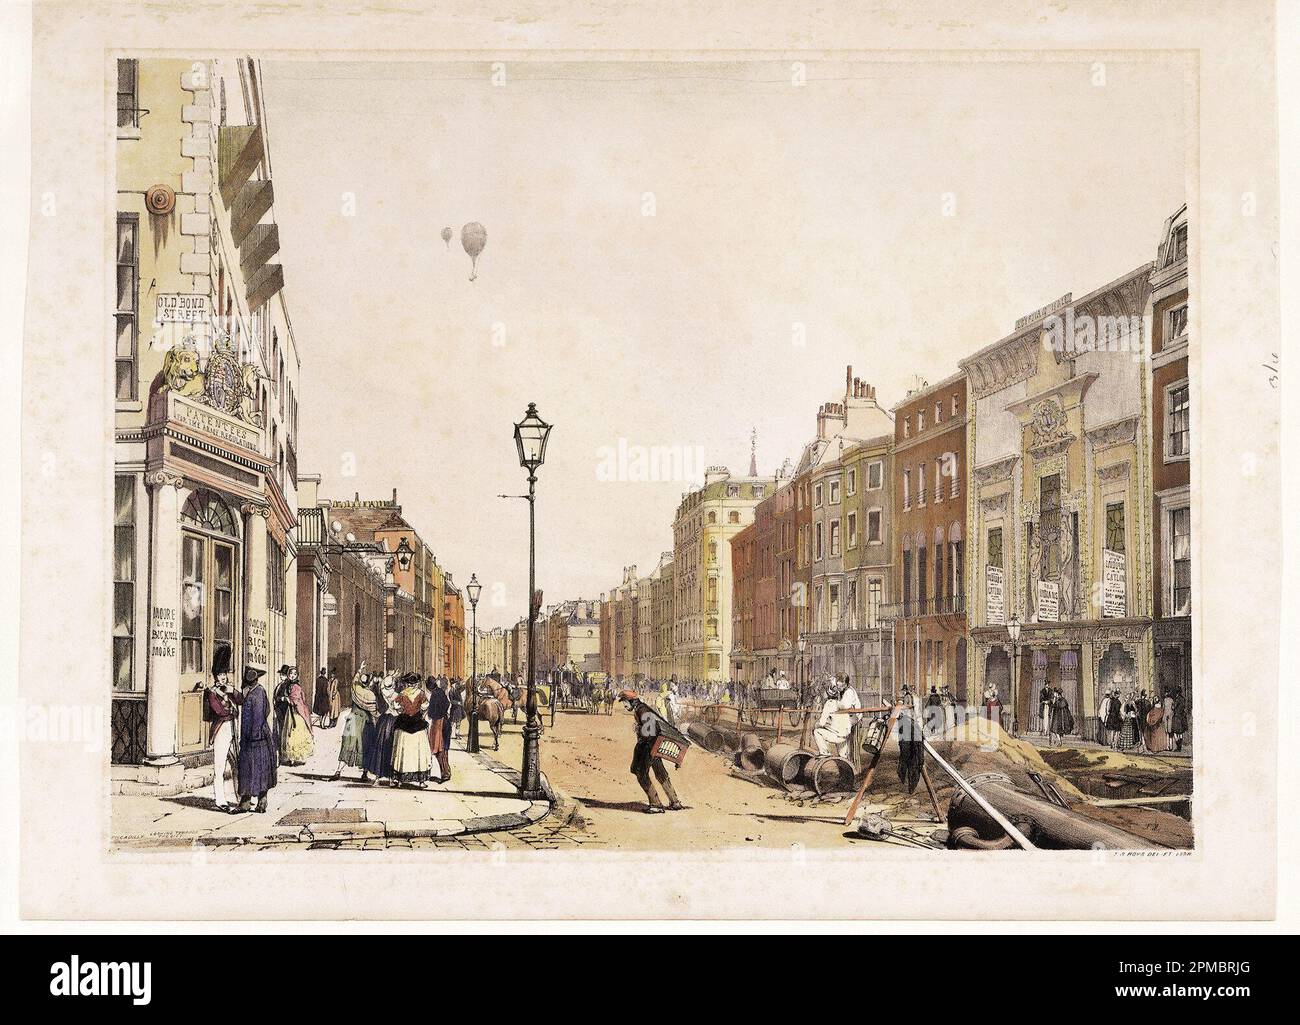 Print, Piccadilly Looking Toward the City; Thomas Shotter Boys (English, 1803 – 1874); England; lithograph; Sheet: 37.3 x 50.3 cm (14 11/16 x 19 13/16 in.) Image: 31.9 x 43.5 cm (12 9/16 x 17 1/8 in.) Stock Photo